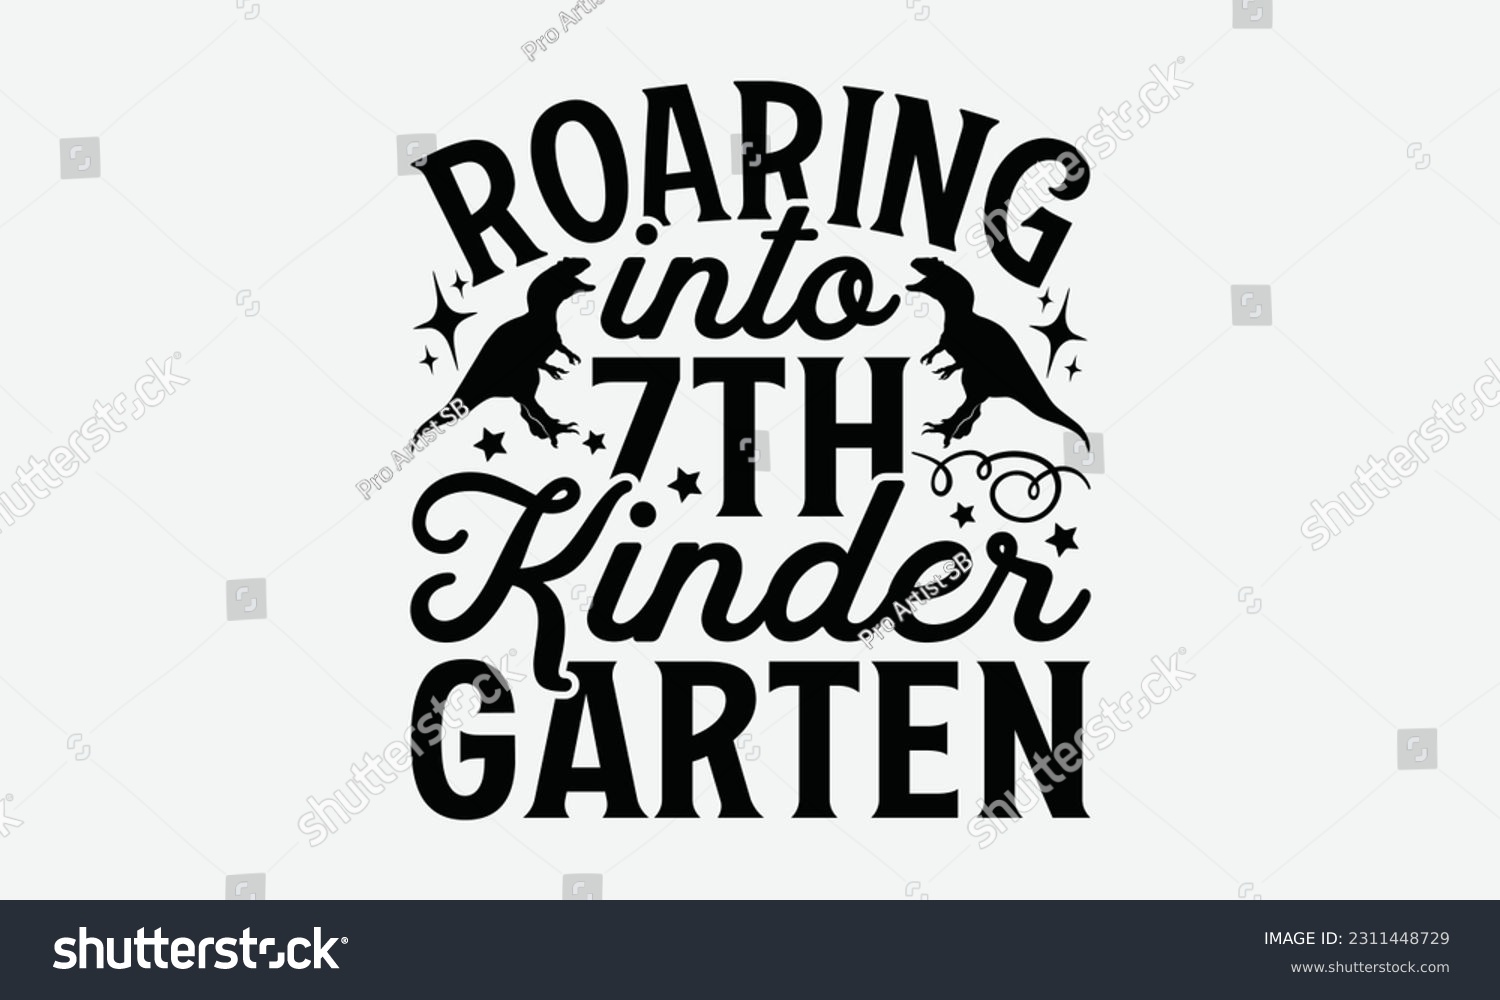 SVG of Roaring Into 7th Kinder Garten - Dinosaur SVG Design, Handmade Calligraphy Vector Illustration, Greeting Card Template With Typography Text. svg